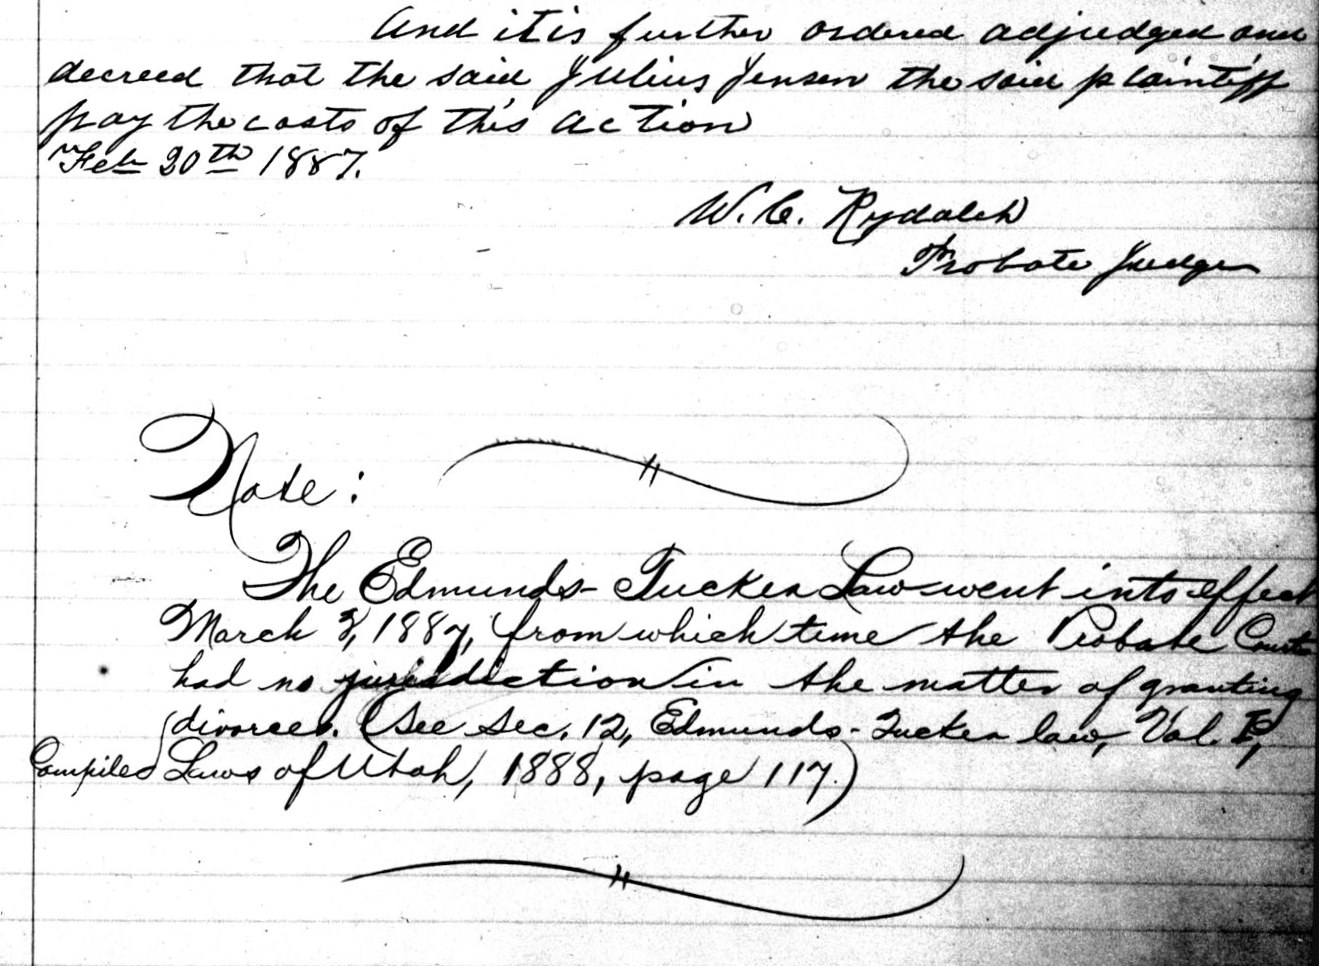 Image of page in the divorce record book showing a note regarding the implementation of the Edmunds_Tucker Act.